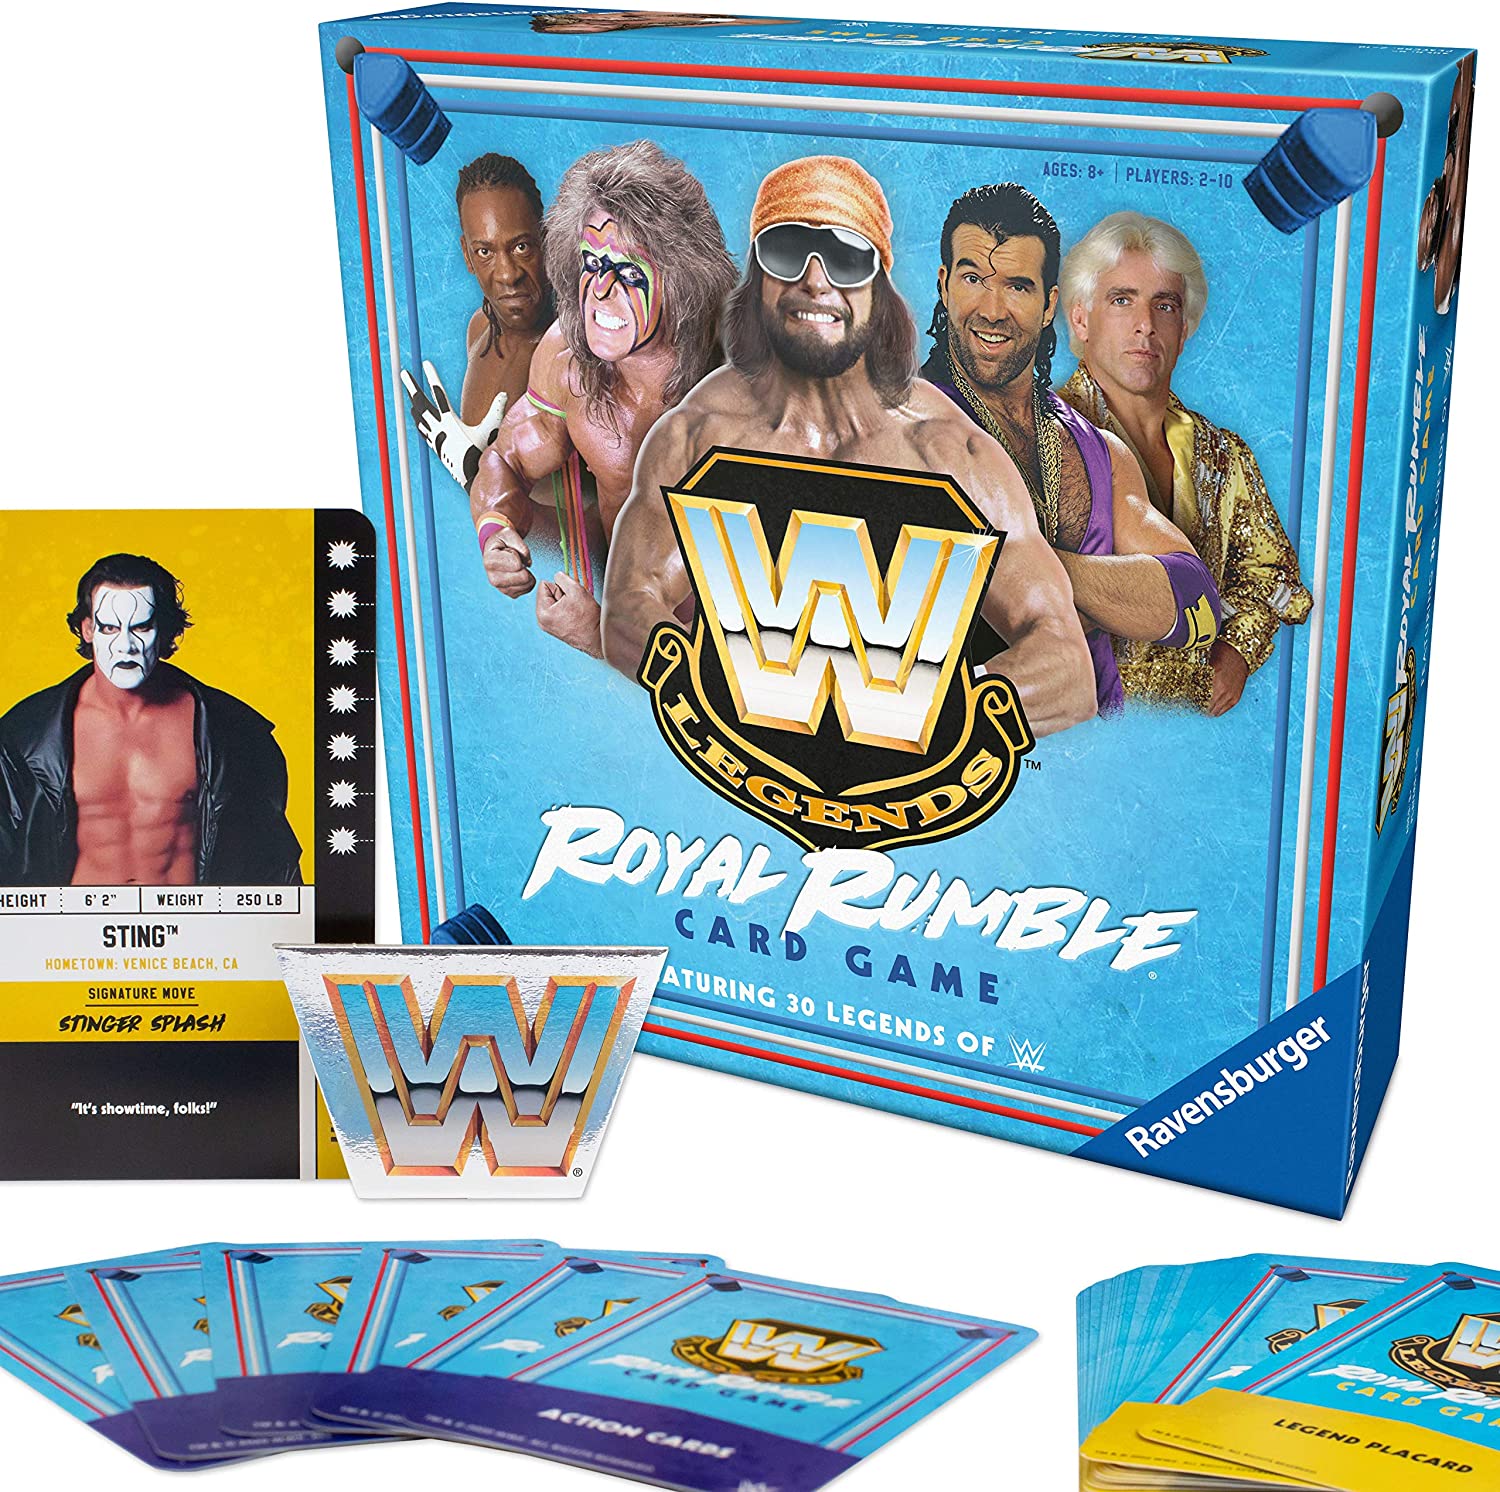 A photograph displaying the "Ravensburger WWE Legends Royal Rumble Card Game" featuring a card showcasing WWE Legend Sting, who is playable in the game. 